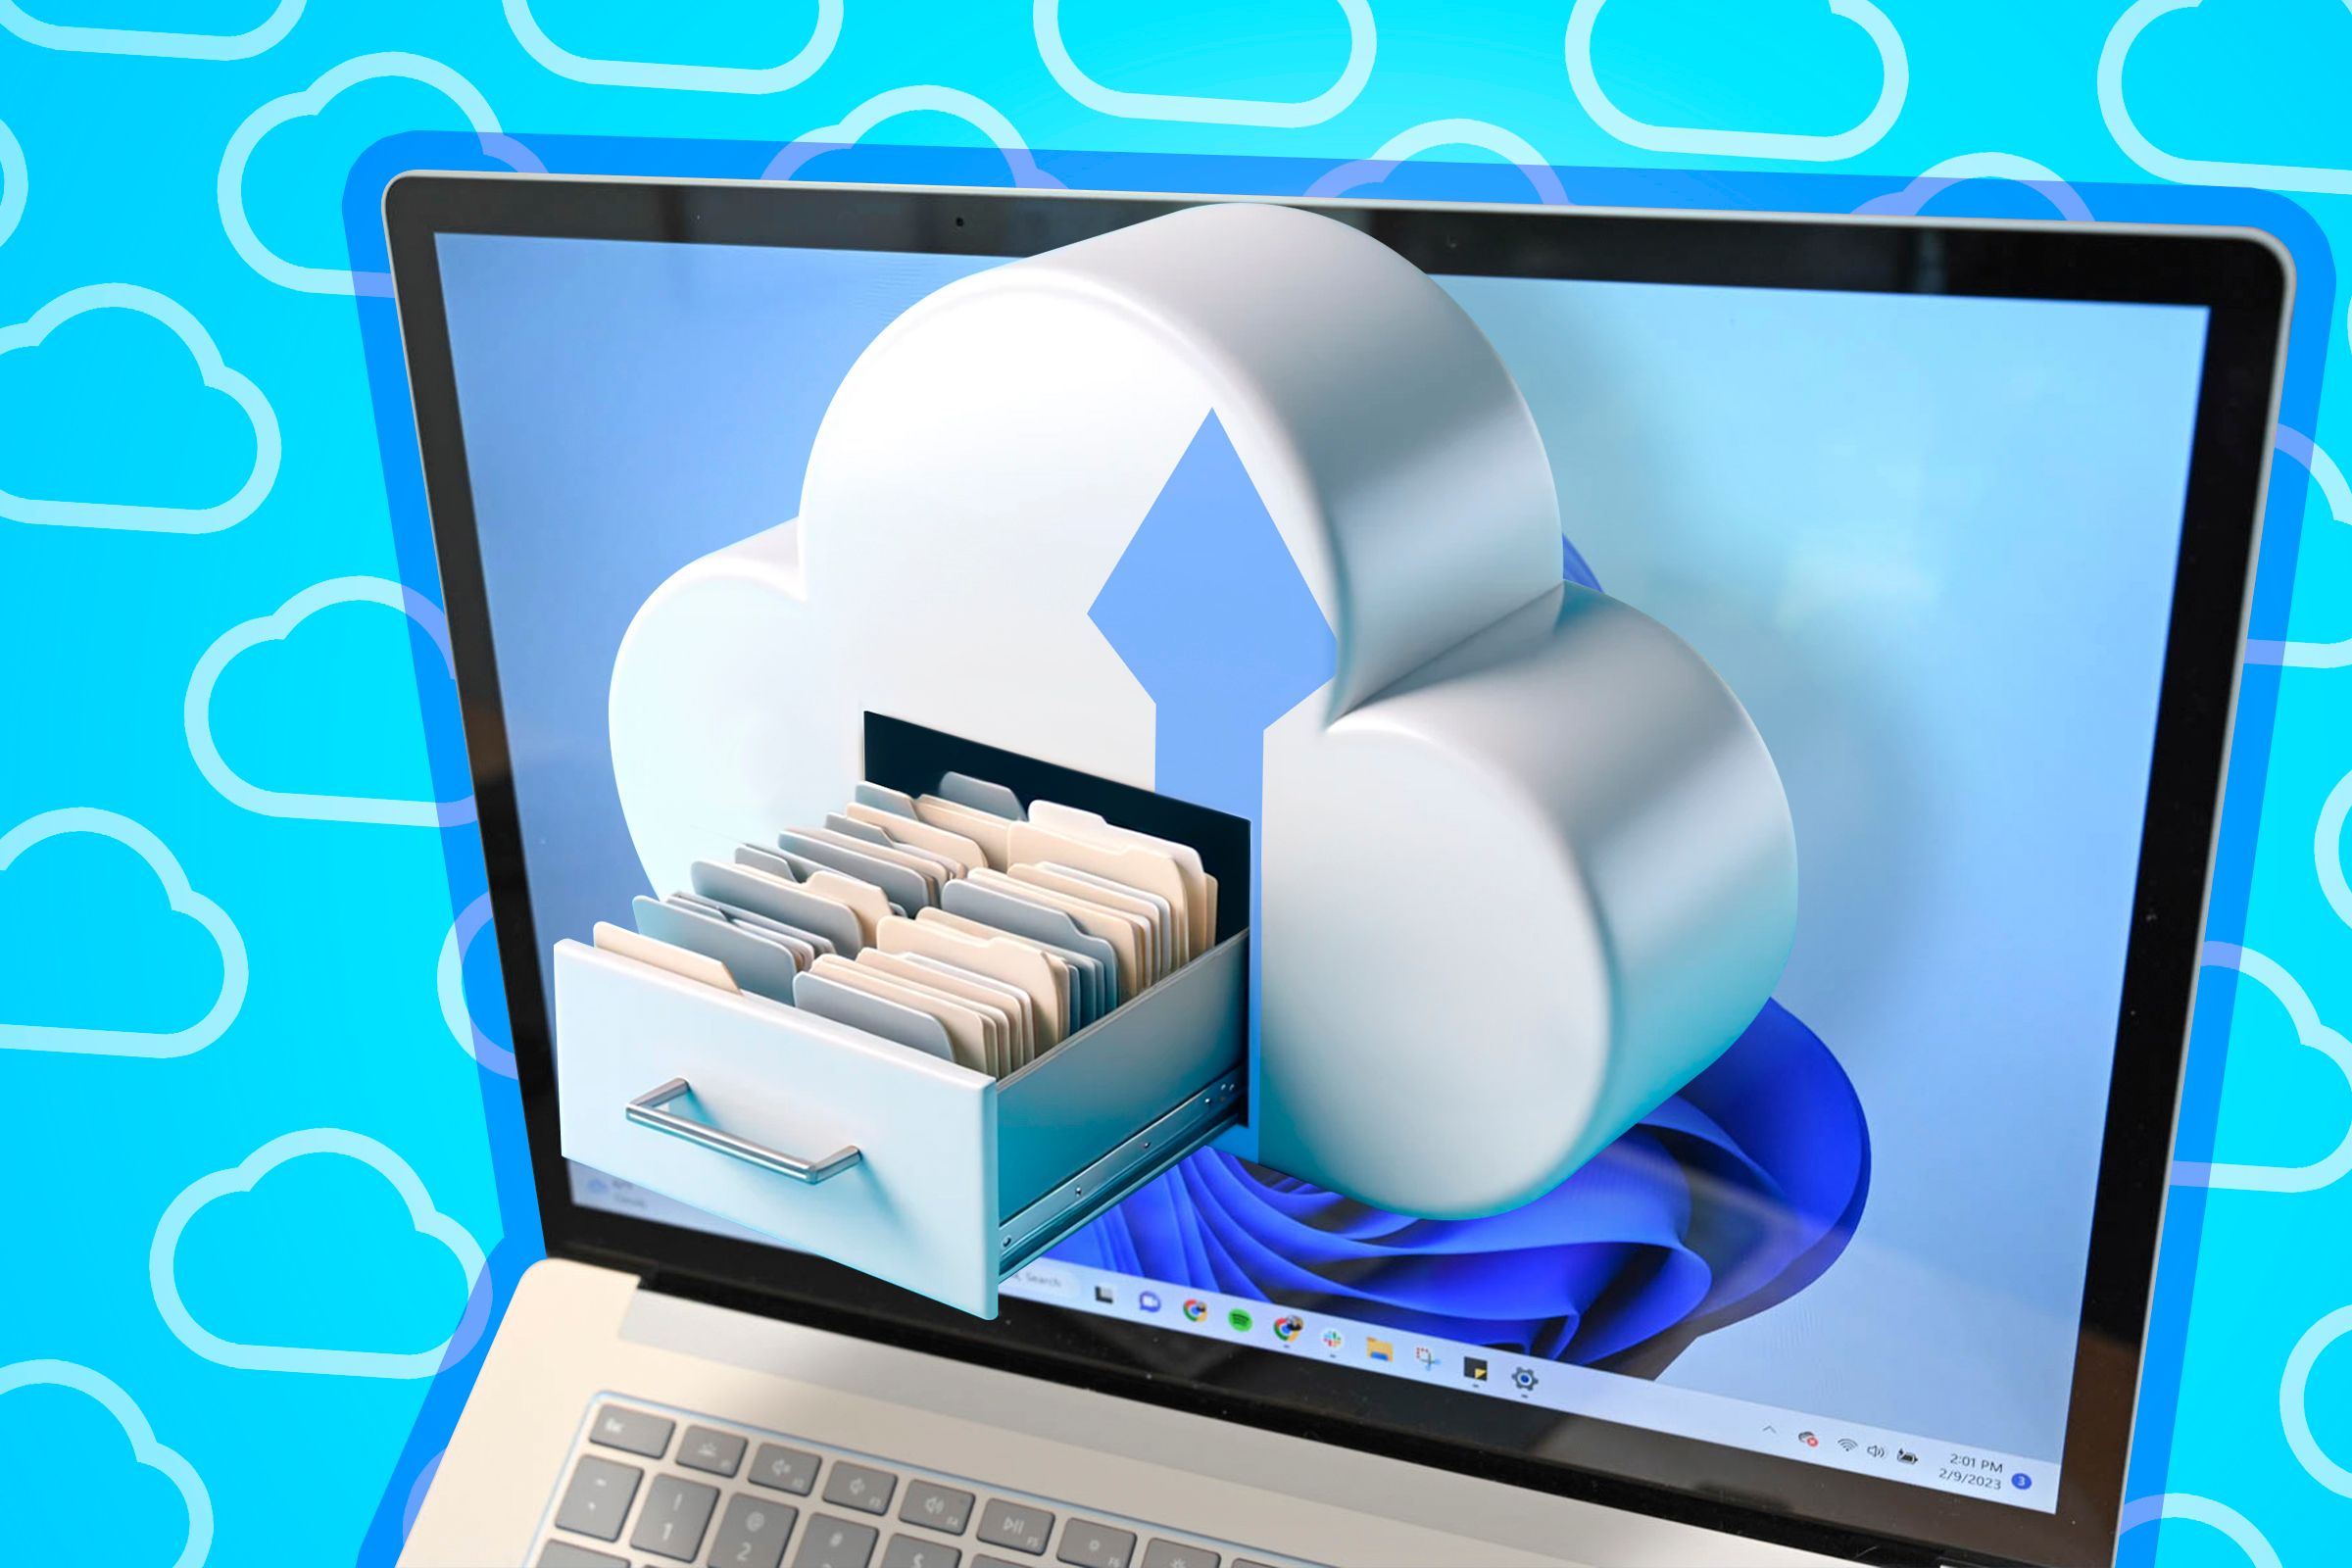 A Windows laptop with a cloud-shaped file drawer coming out of the screen.